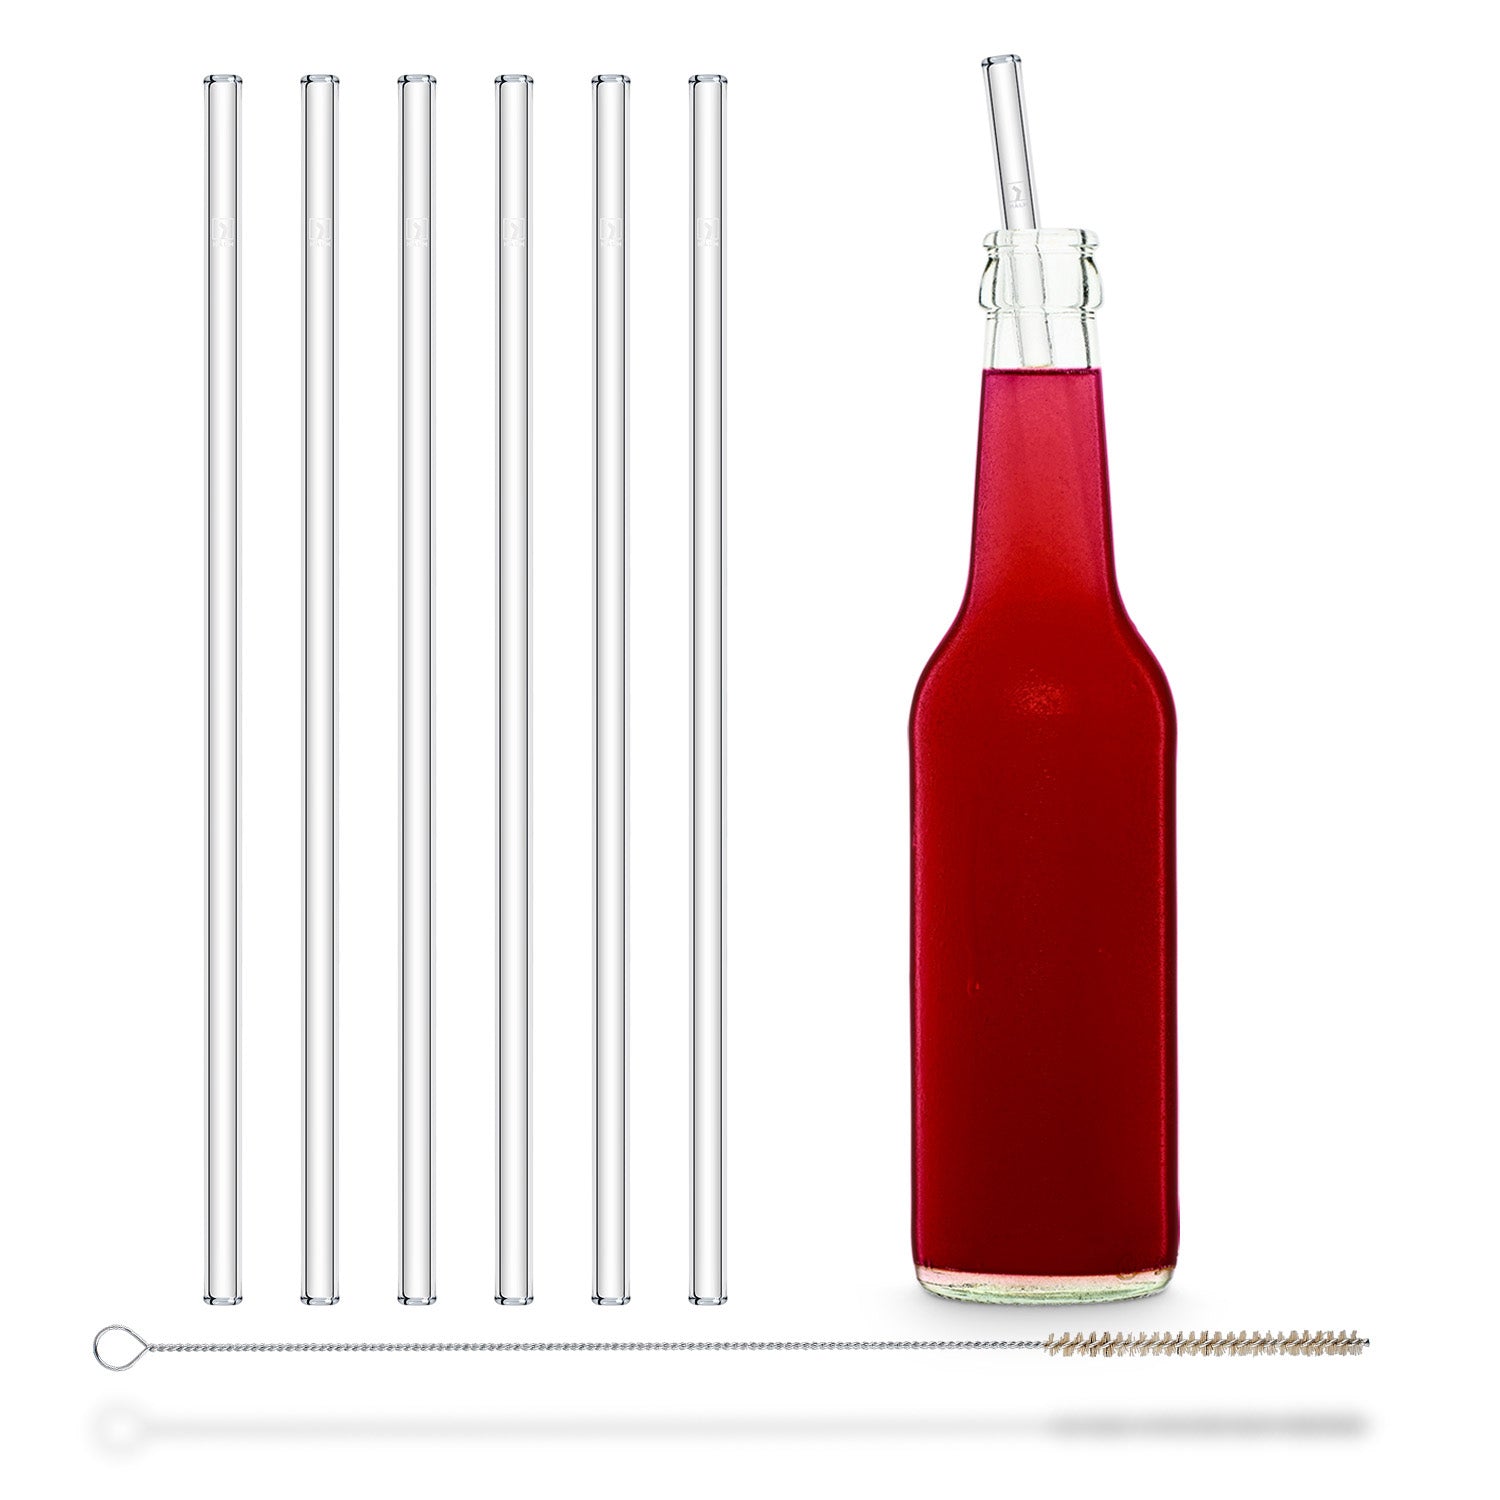 HALM Reusable Glass Straws 4 inch with plastic free brush - Set of